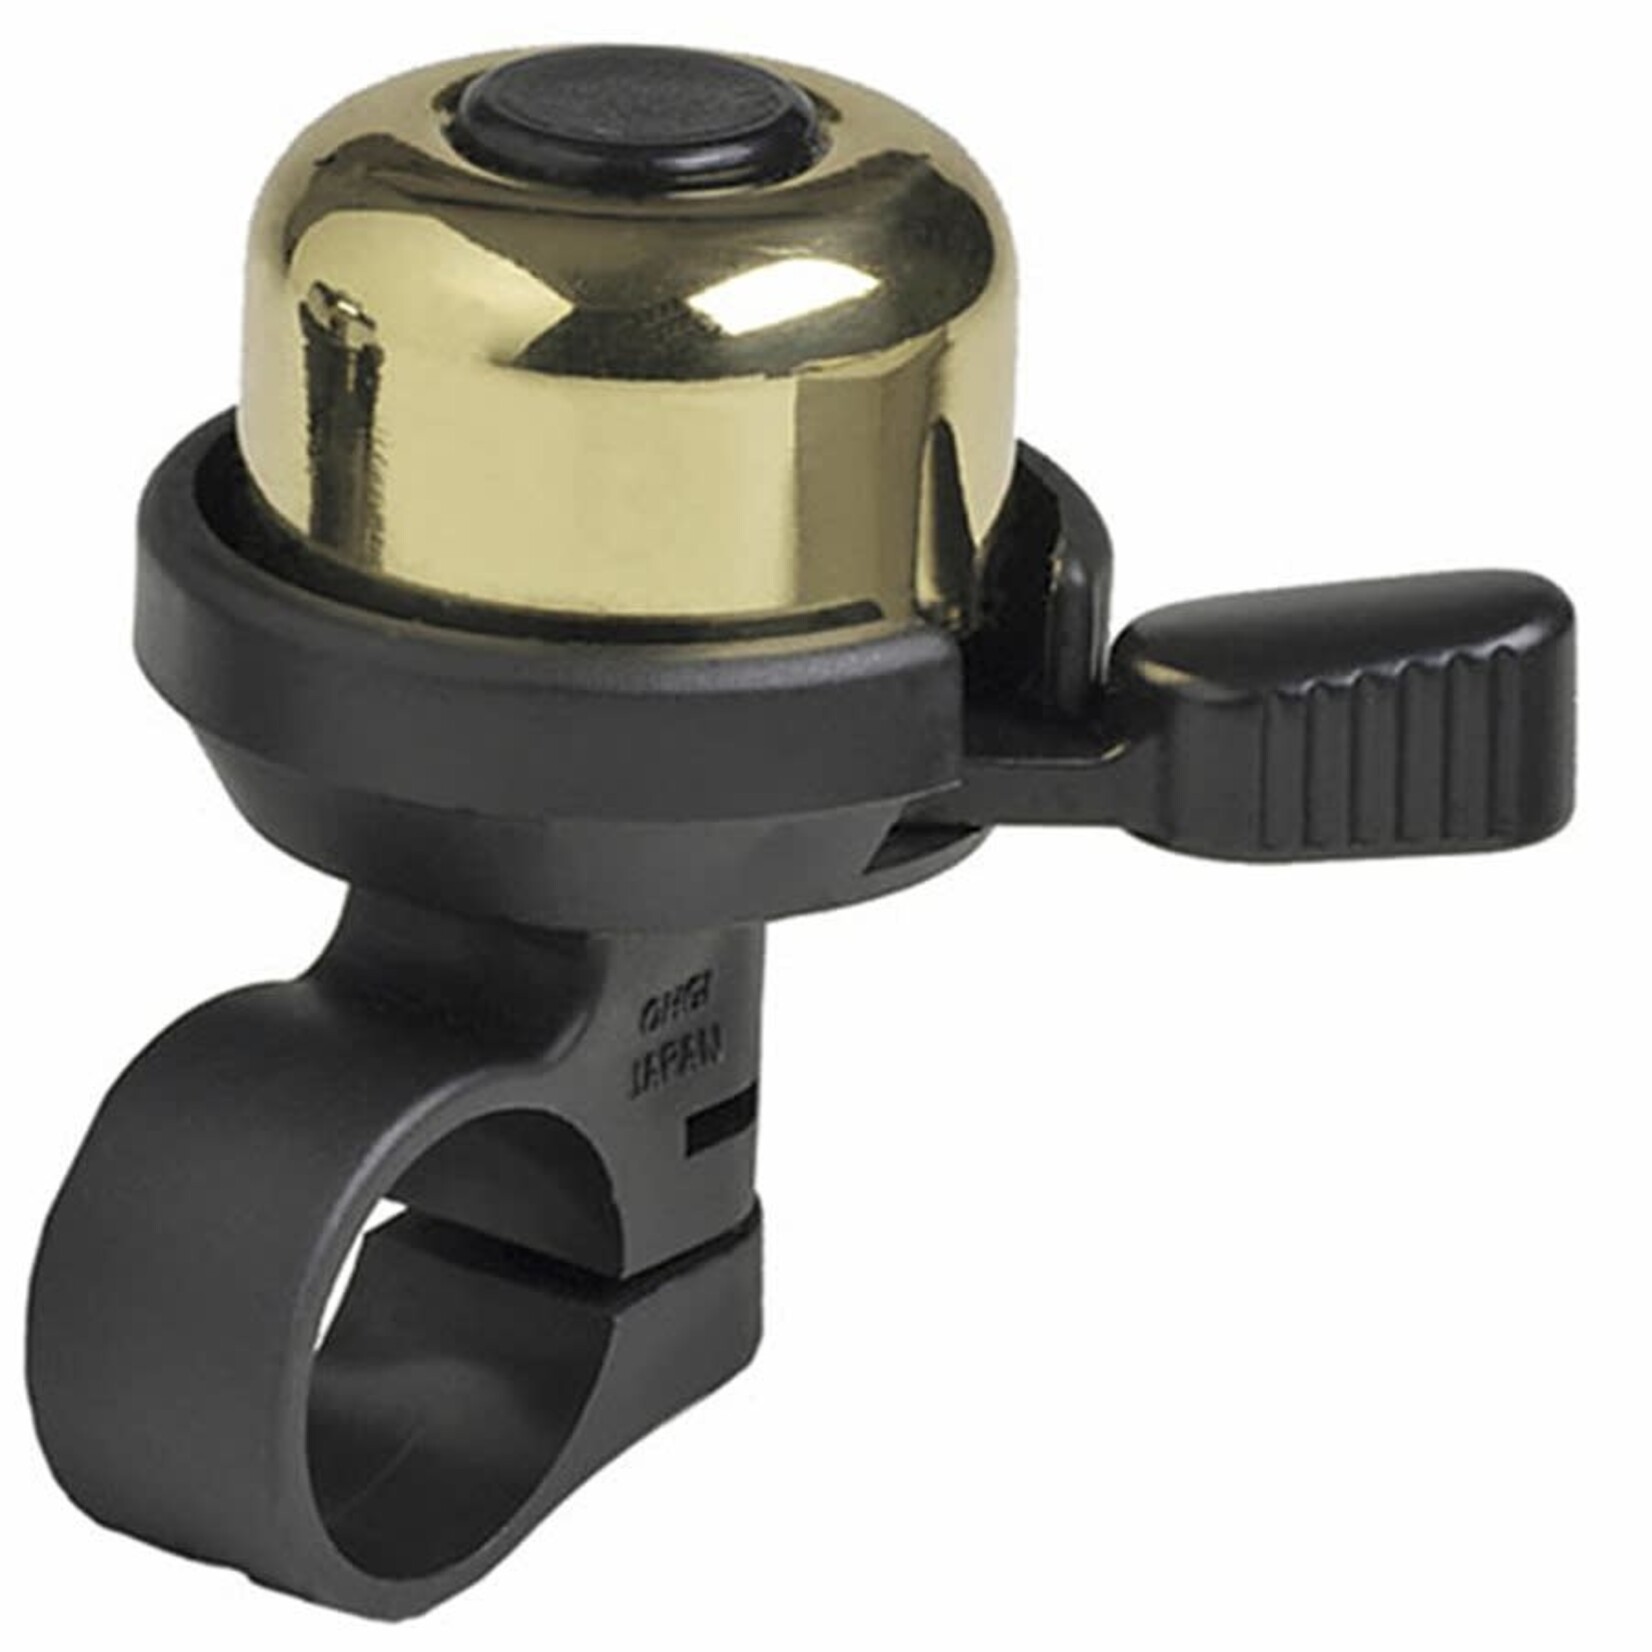 Mirrcycle Incredibell Brass Duet